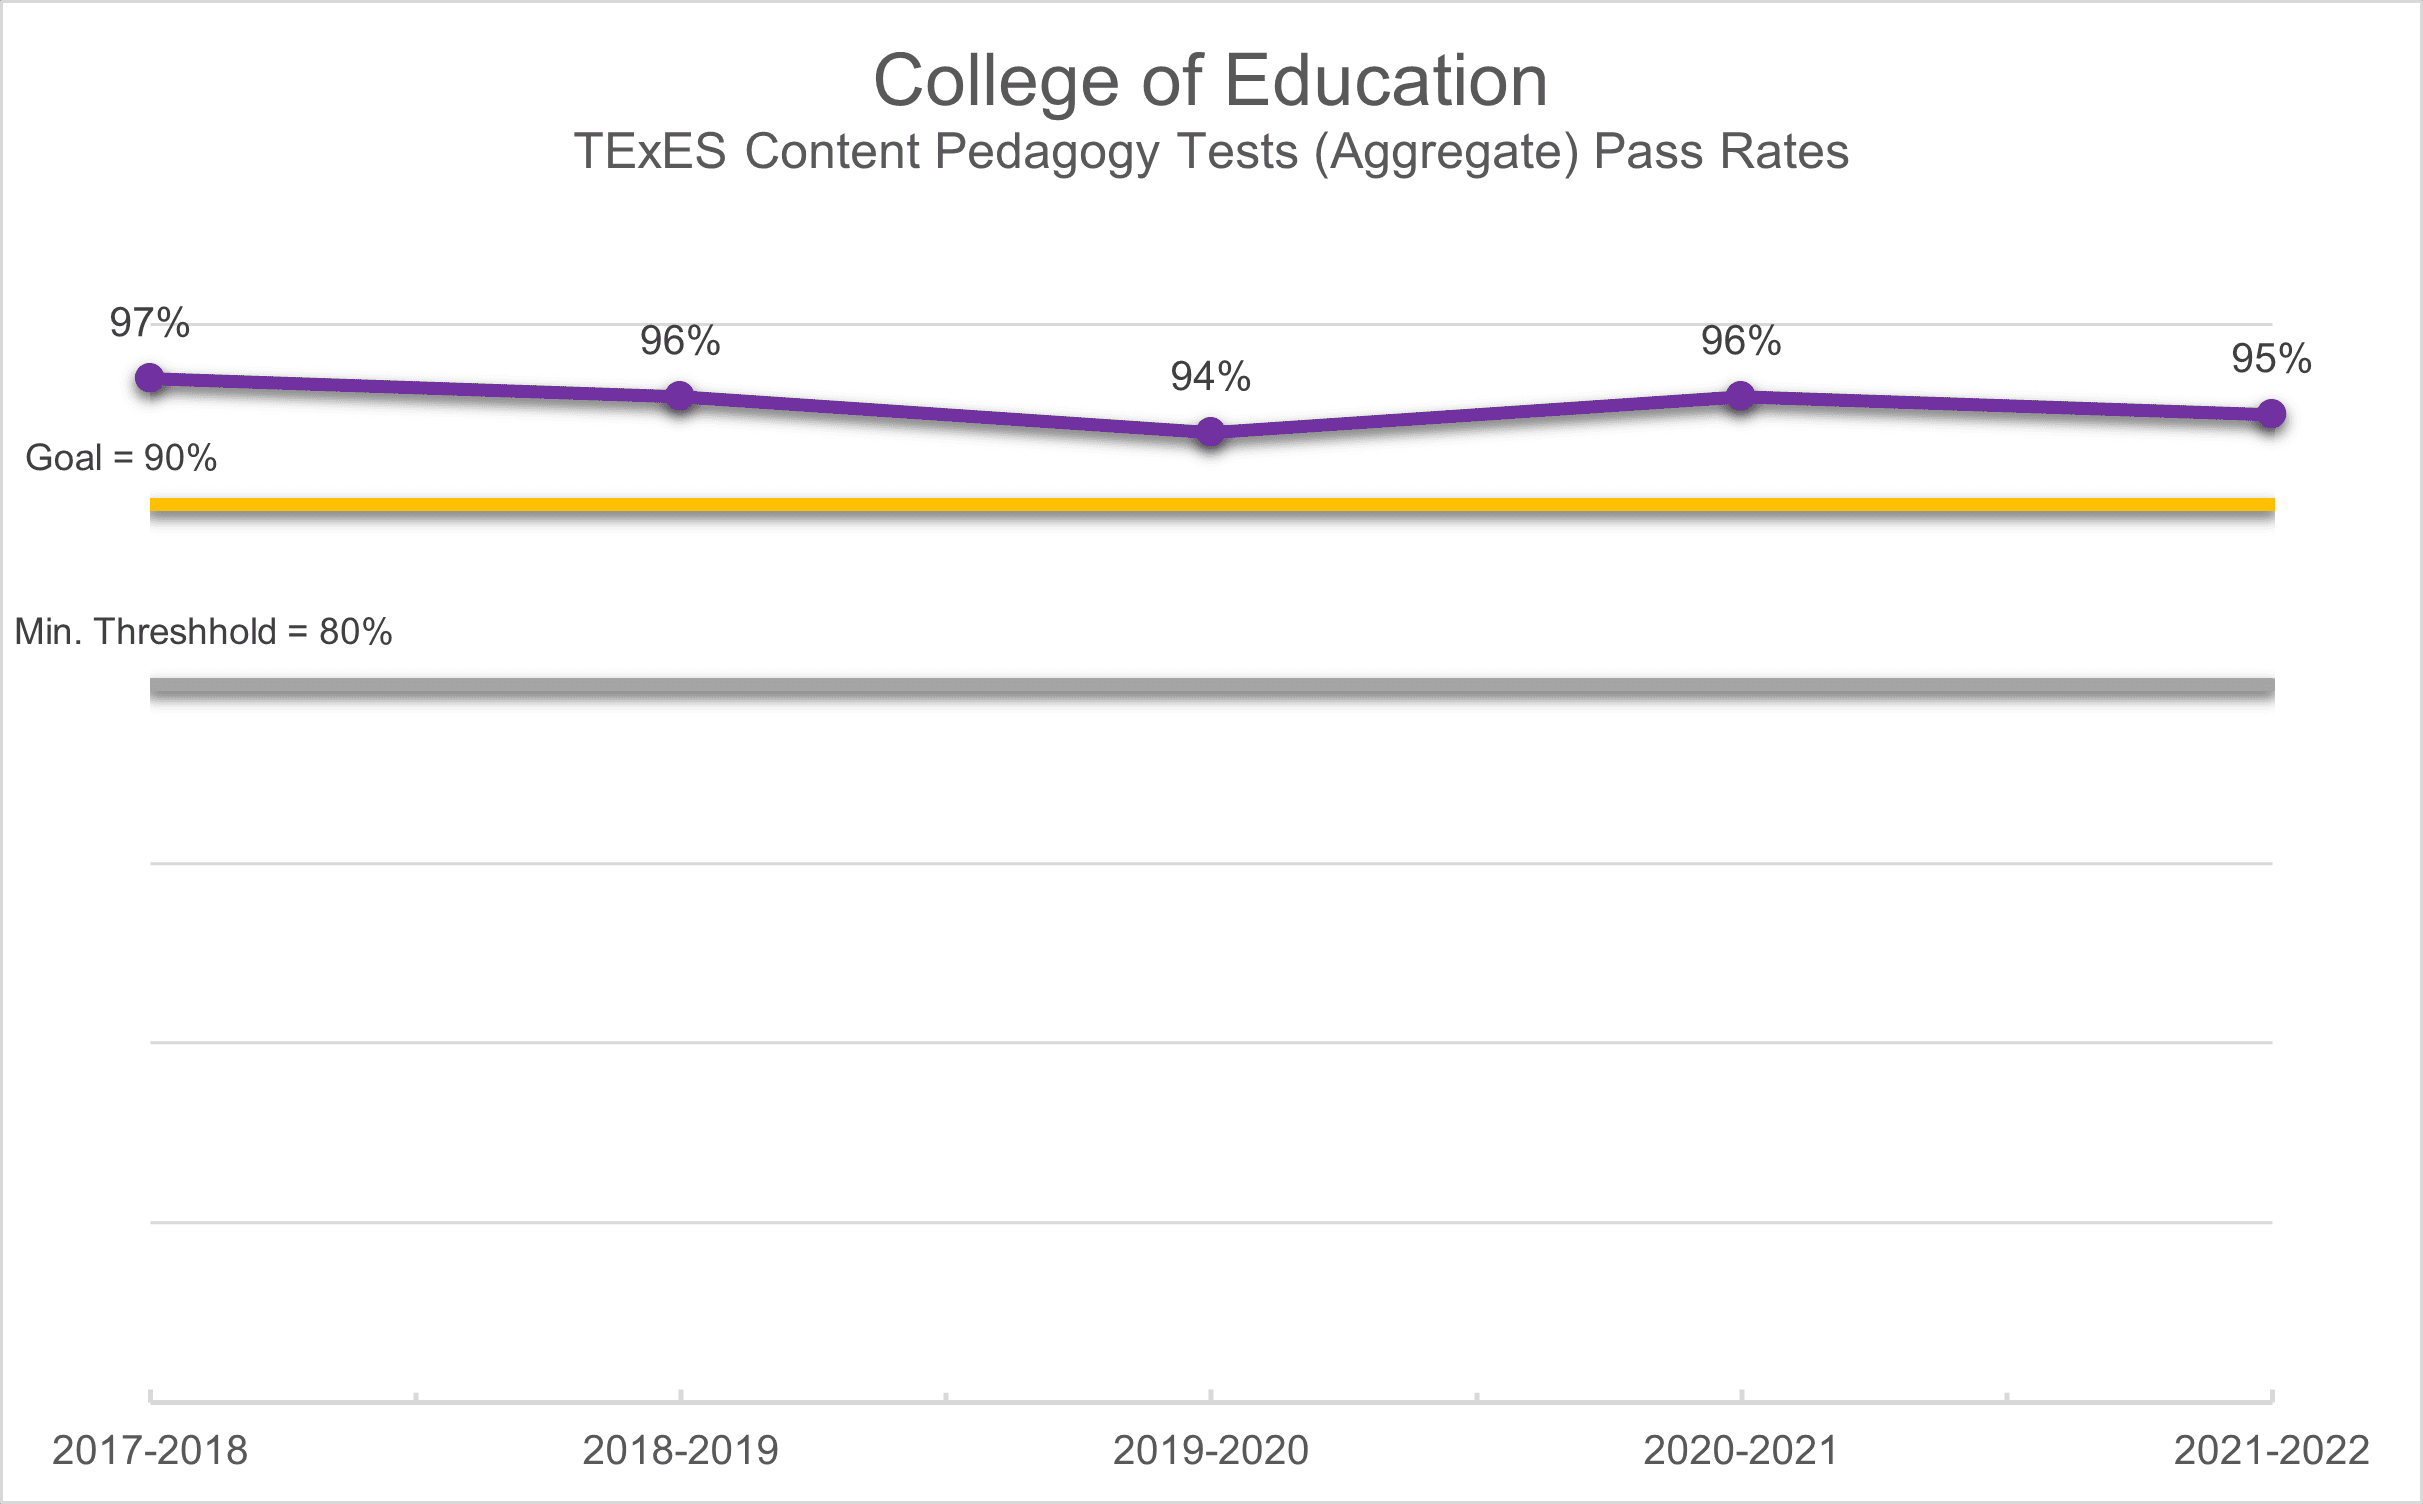 College of Education TExES content pedagogy test aggregate pass rates